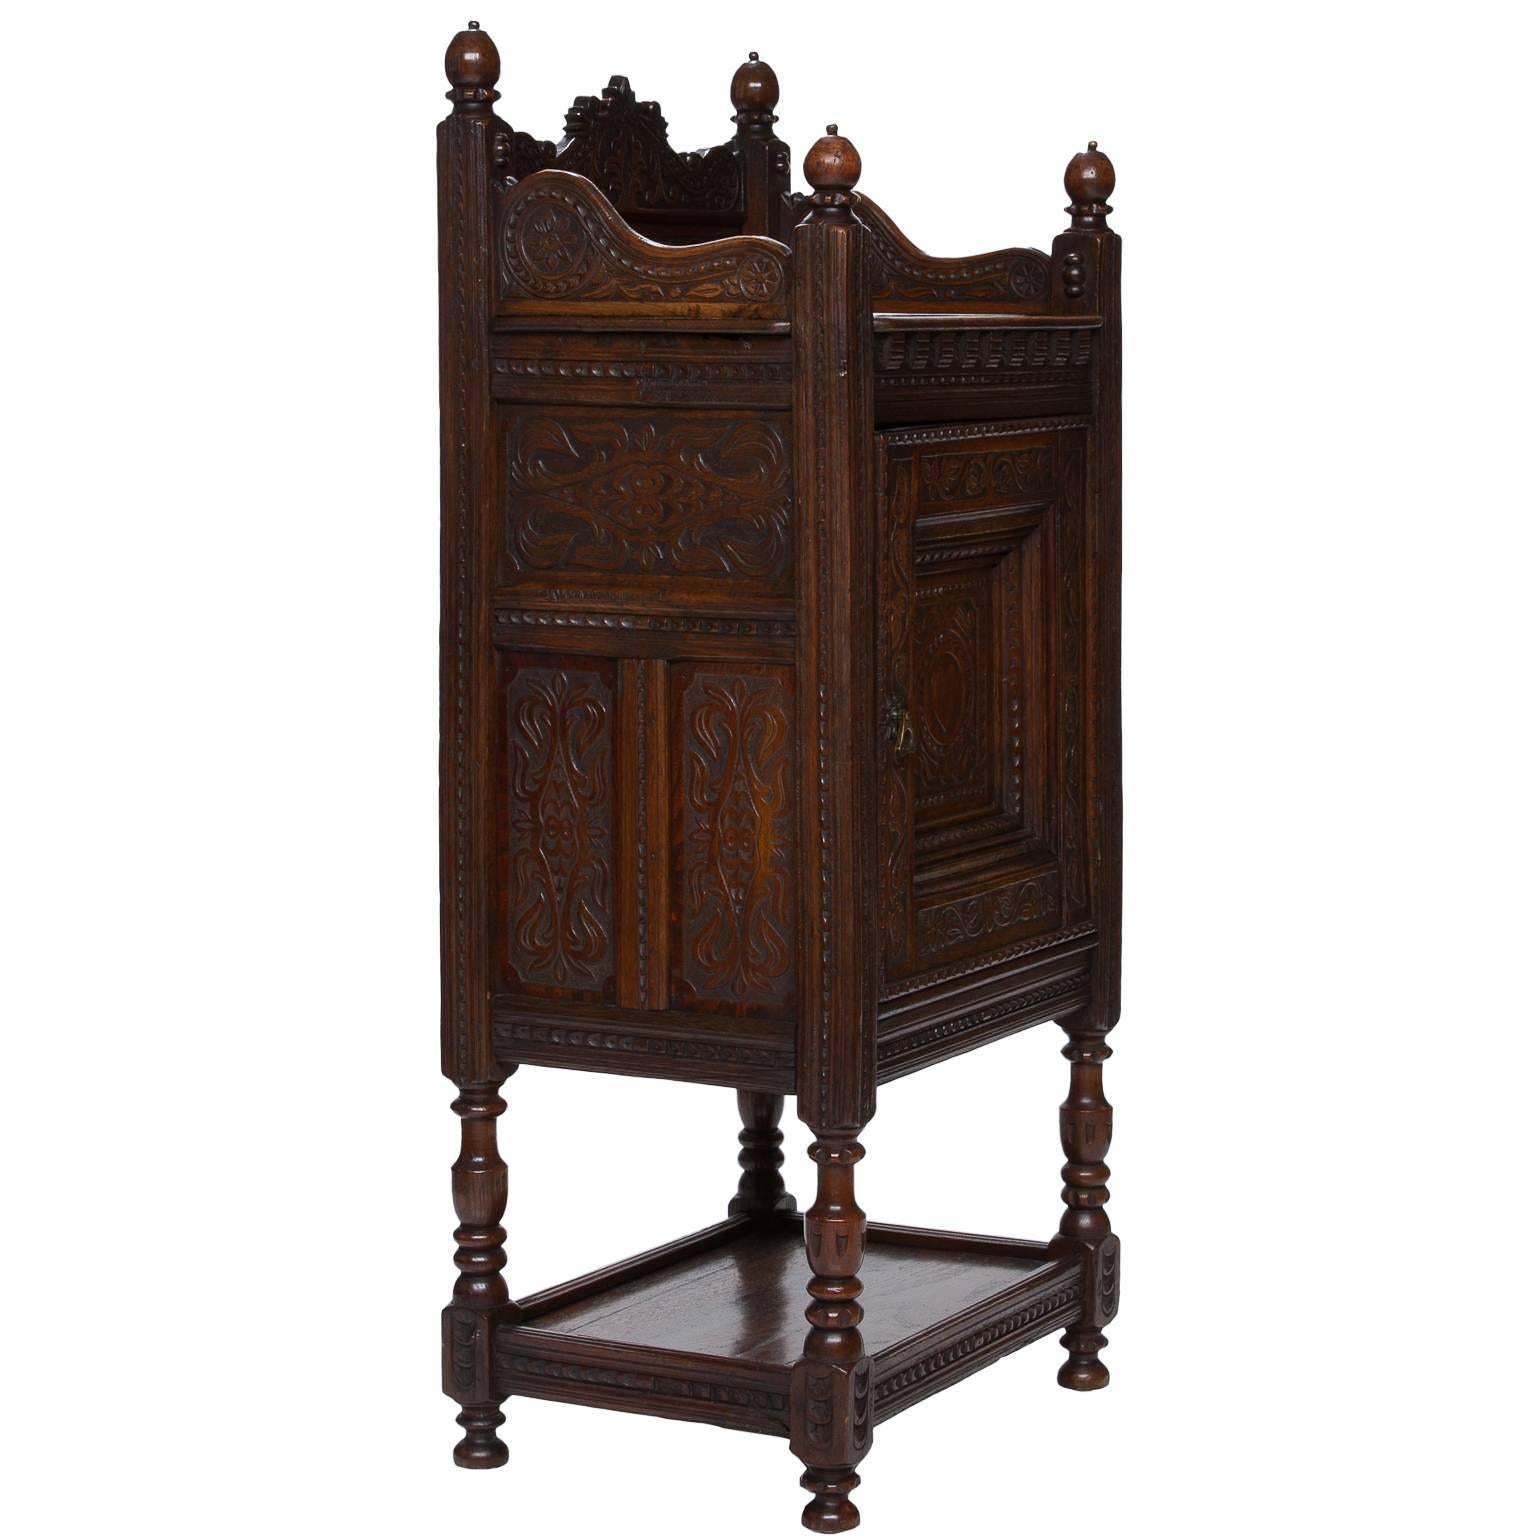 A strong 18th century carved single door cabinet with shelf above and below the cabinet section. This piece has a pleasant shellac finish. Turned legs connected with a box stretcher, circa 1790